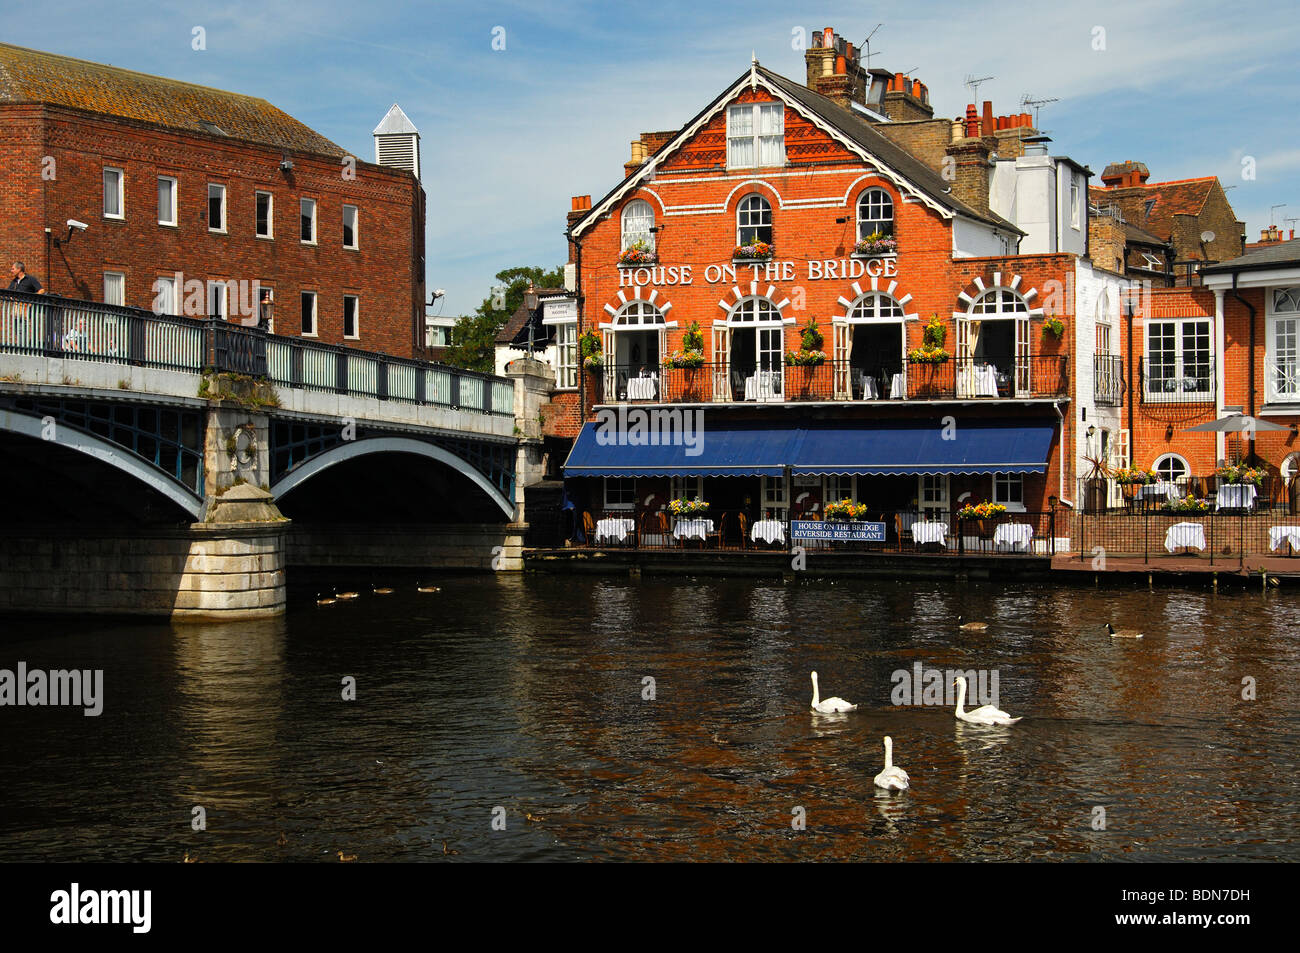 The House on the Bridge Riverside Restaurant situated by the river Thames at Windsor Bridge in Eton, United Kingdom Stock Photo